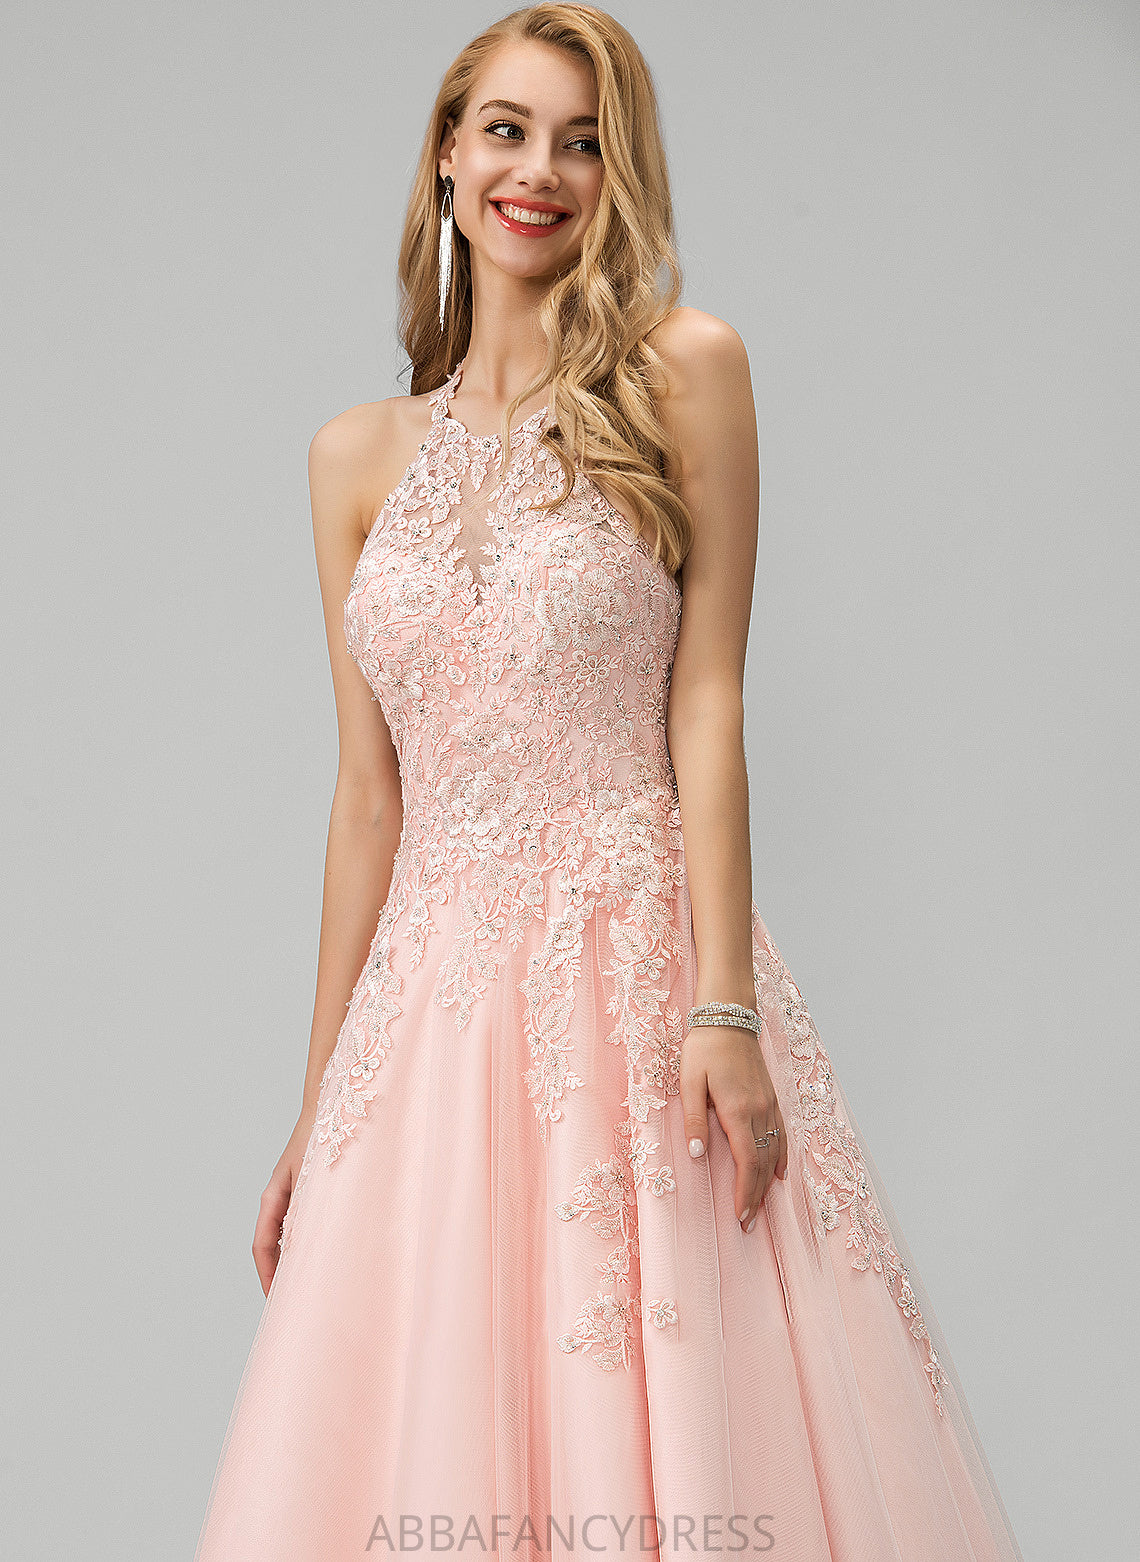 Sequins Beading Lace Ball-Gown/Princess Neck Prom Dresses Scoop Natasha With Floor-Length Tulle